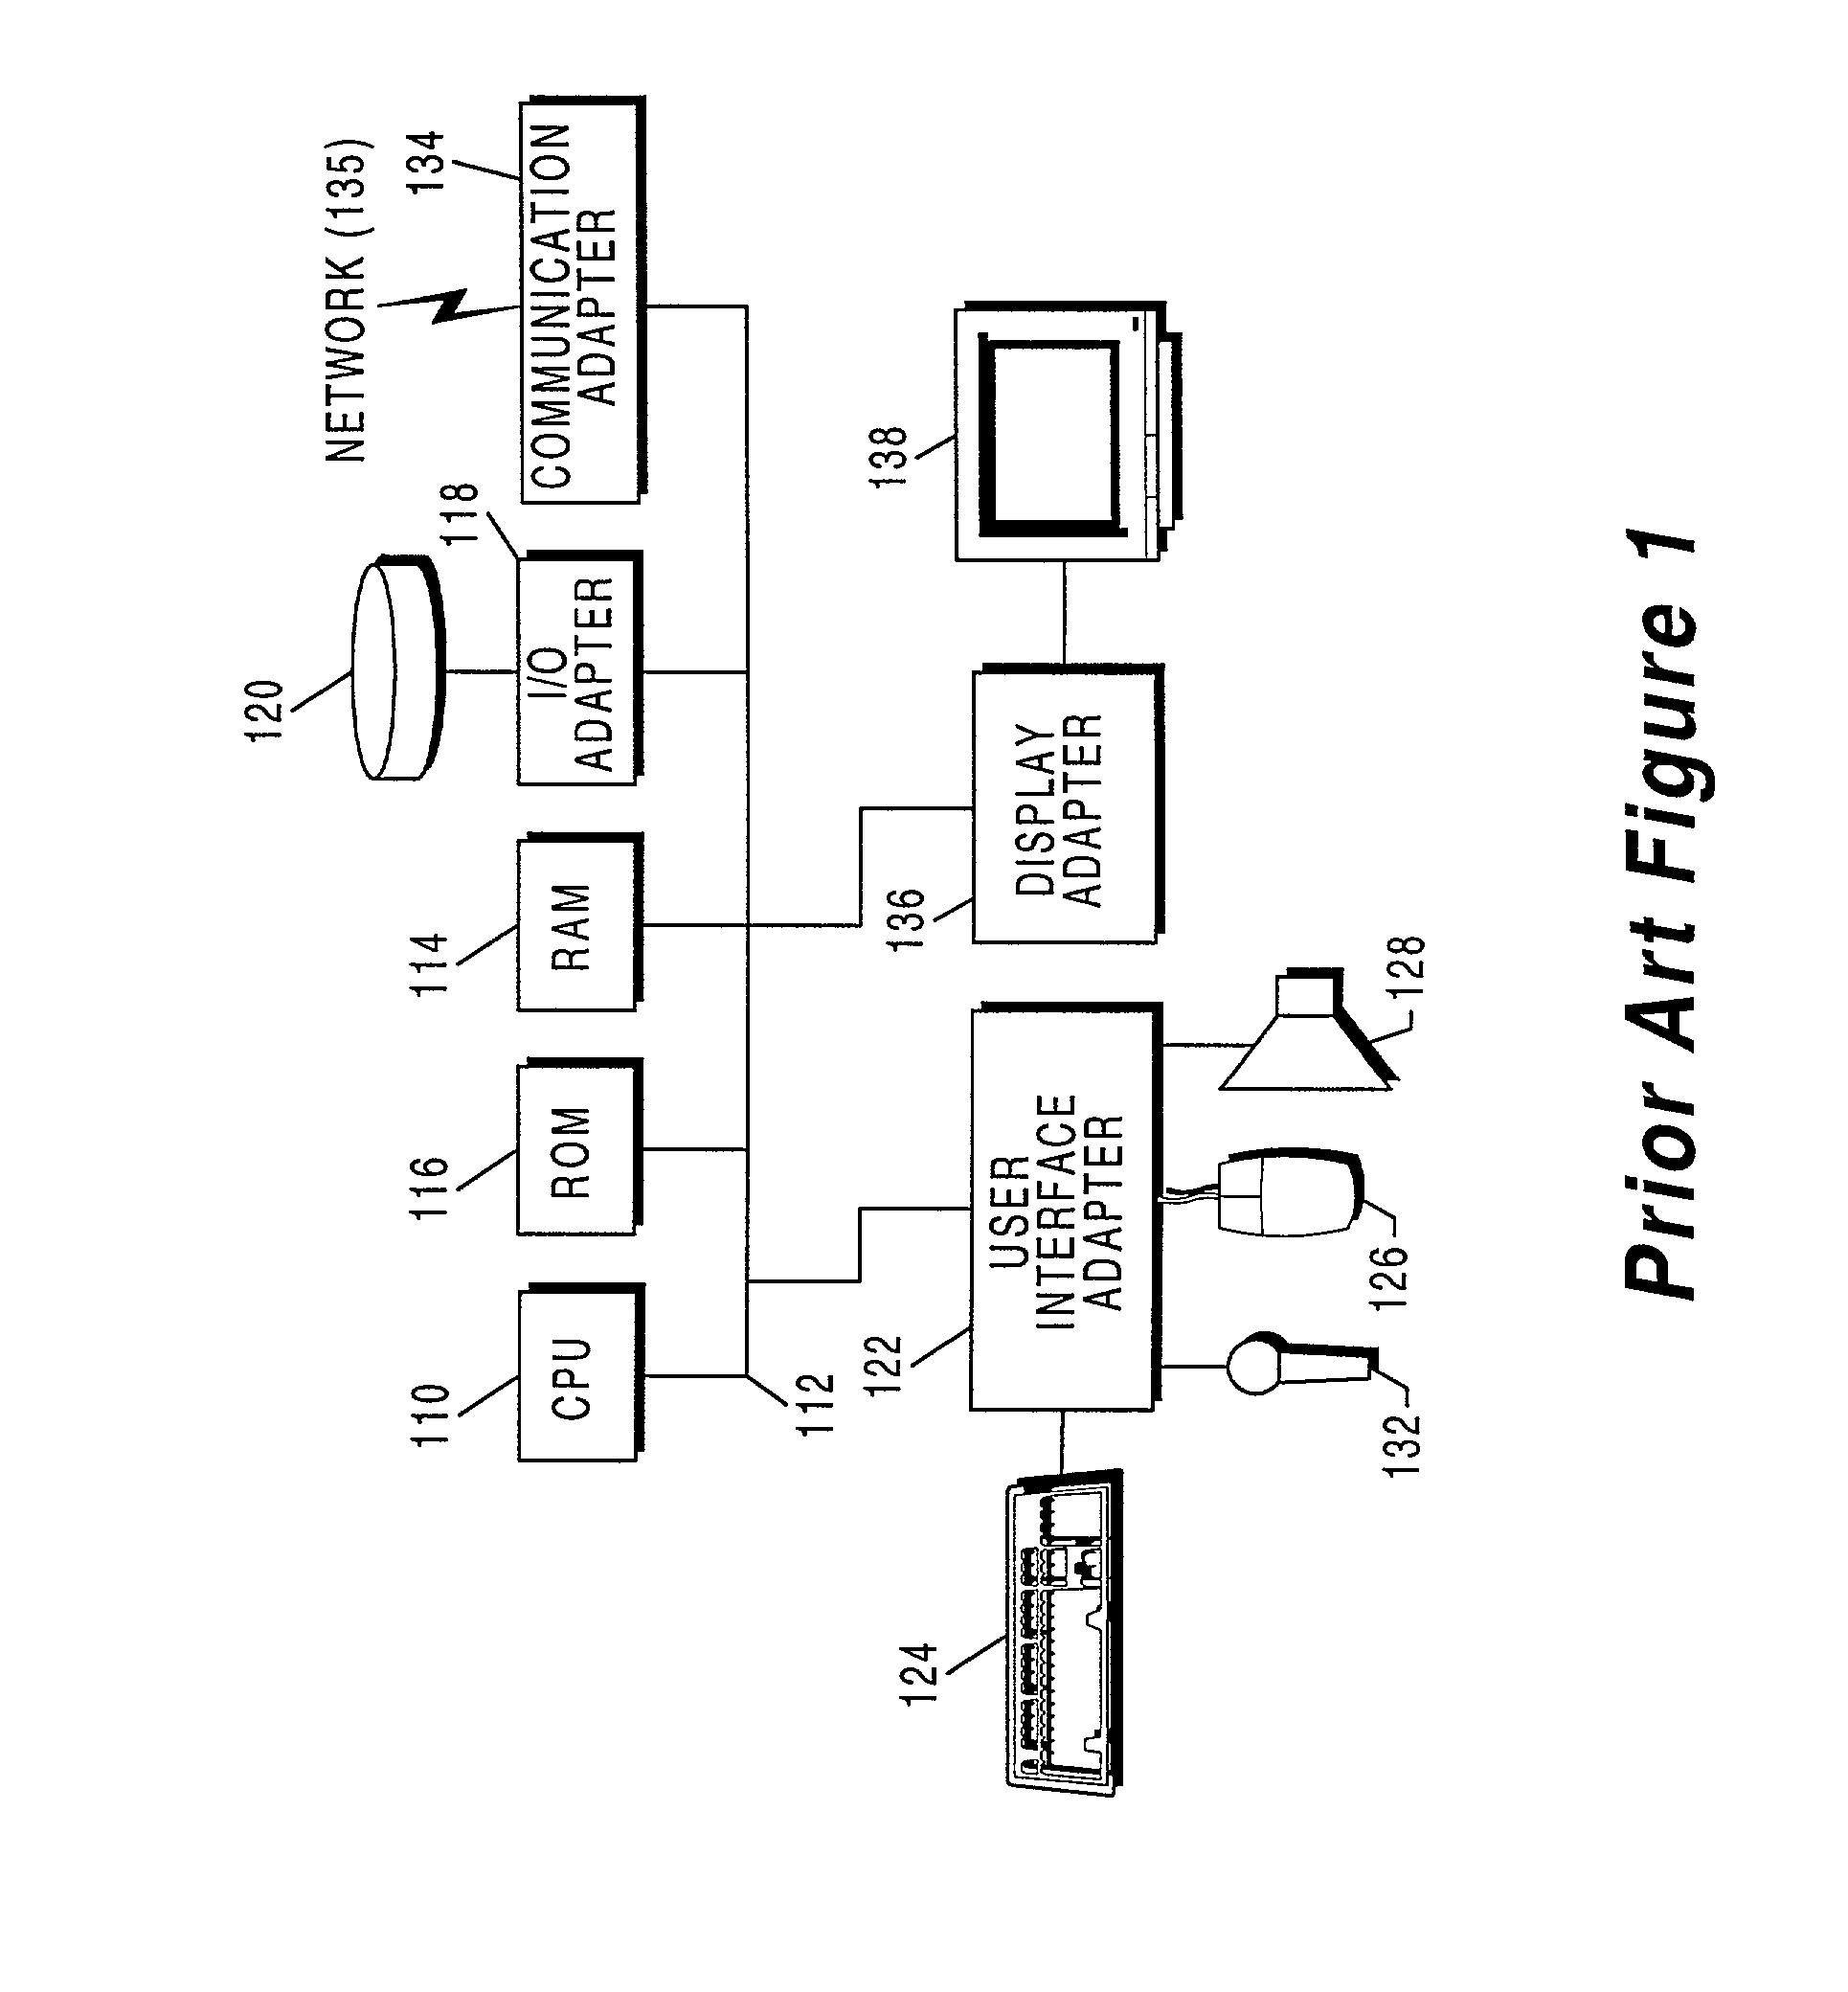 Method and article of manufacturing for component based information linking during claim processing